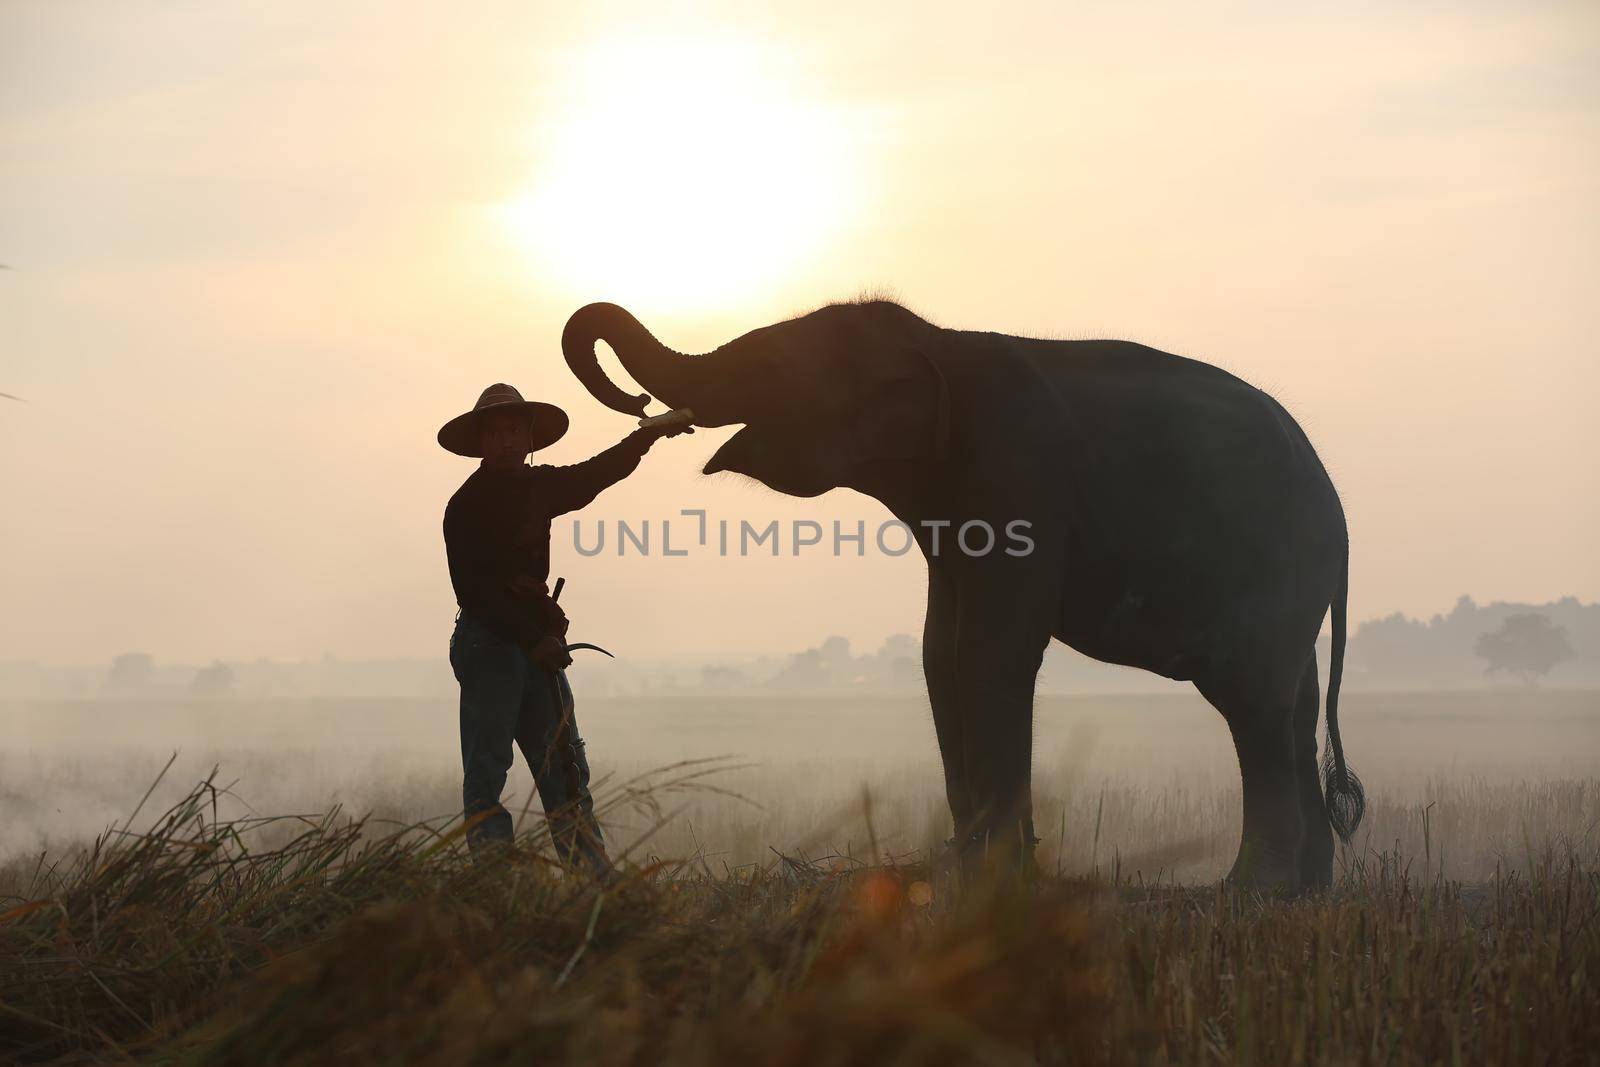 Thailand Countryside; Silhouette elephant on the background of sunset, elephant Thai in Surin Thailand. by chuanchai